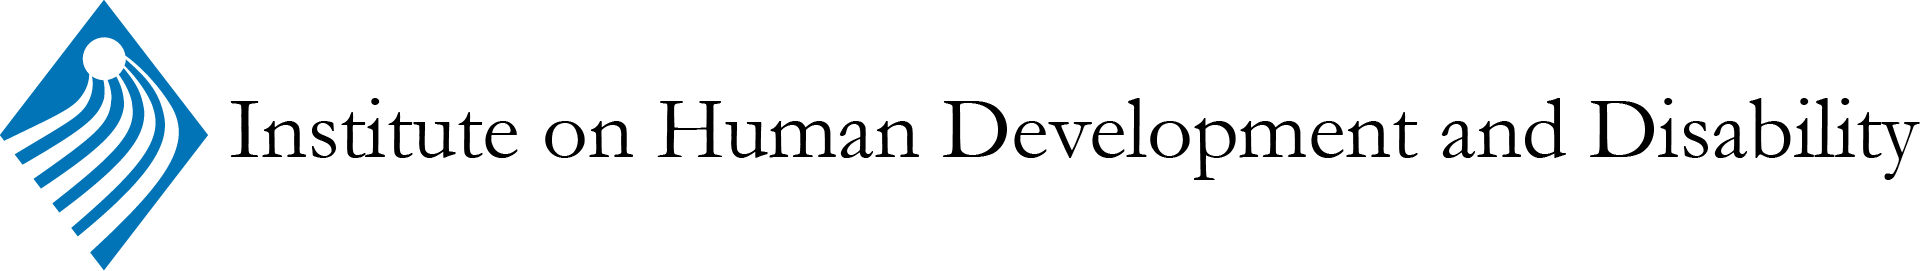 Institute on Human Development and Disability